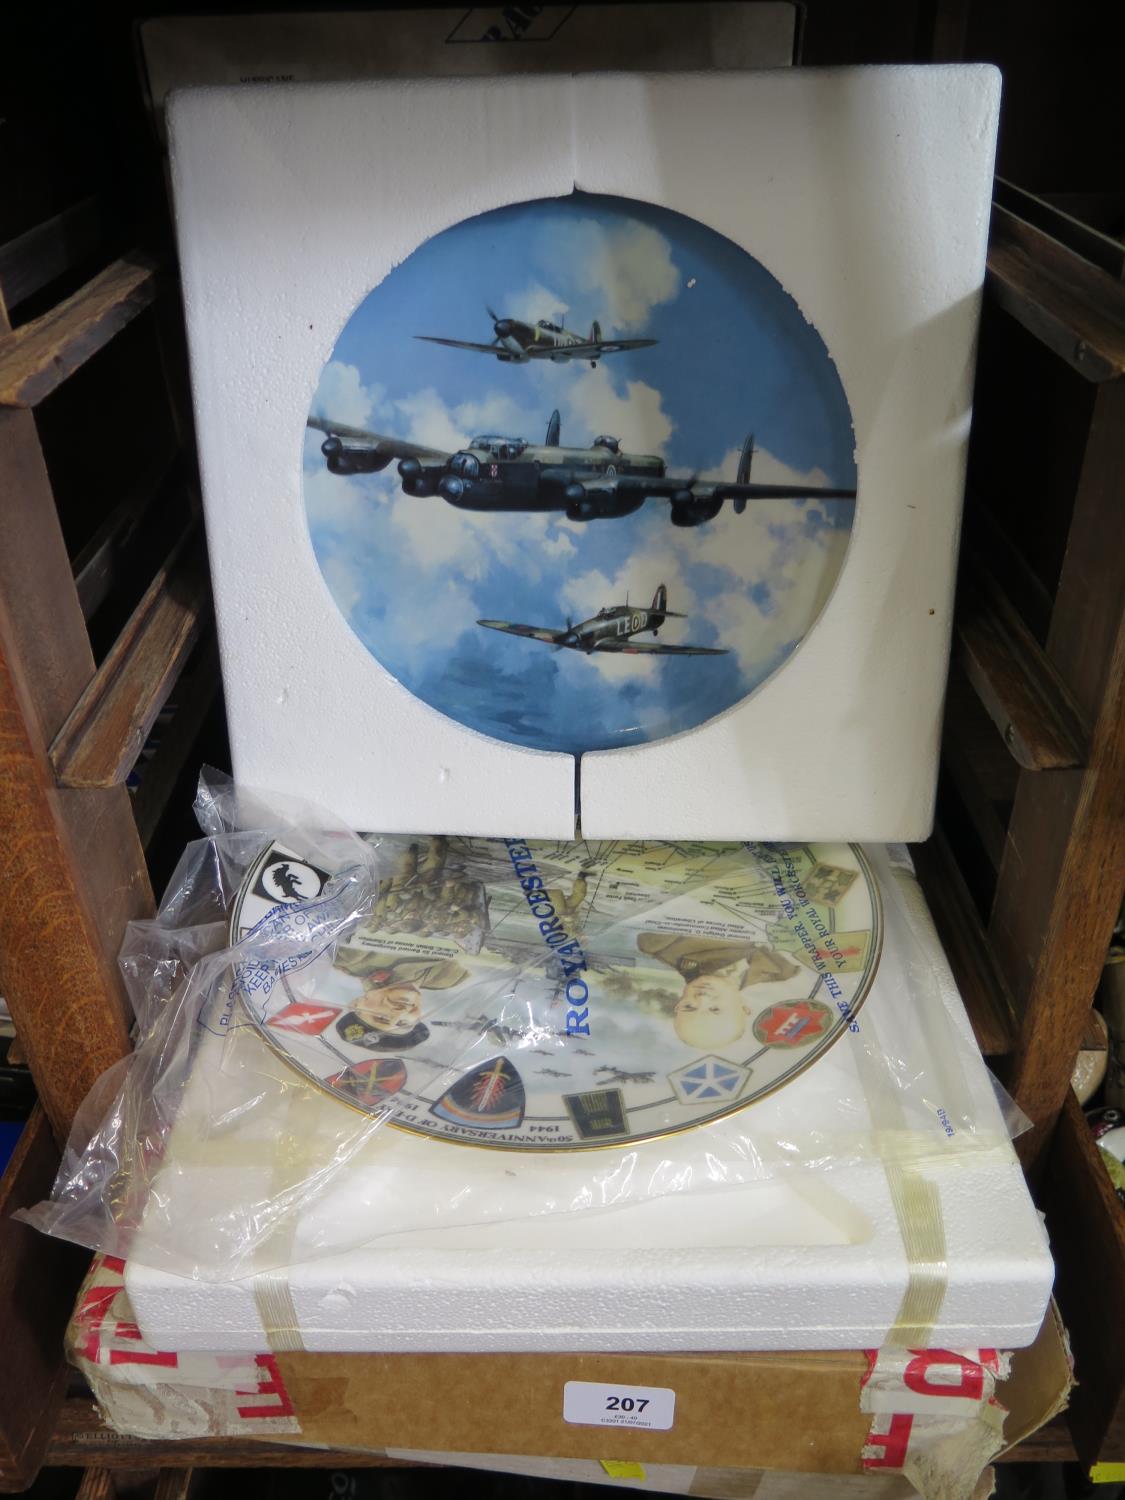 A Royal Worcester plate commemorating the 50th Anniversary of the D-Day Landings, for Peter Jones